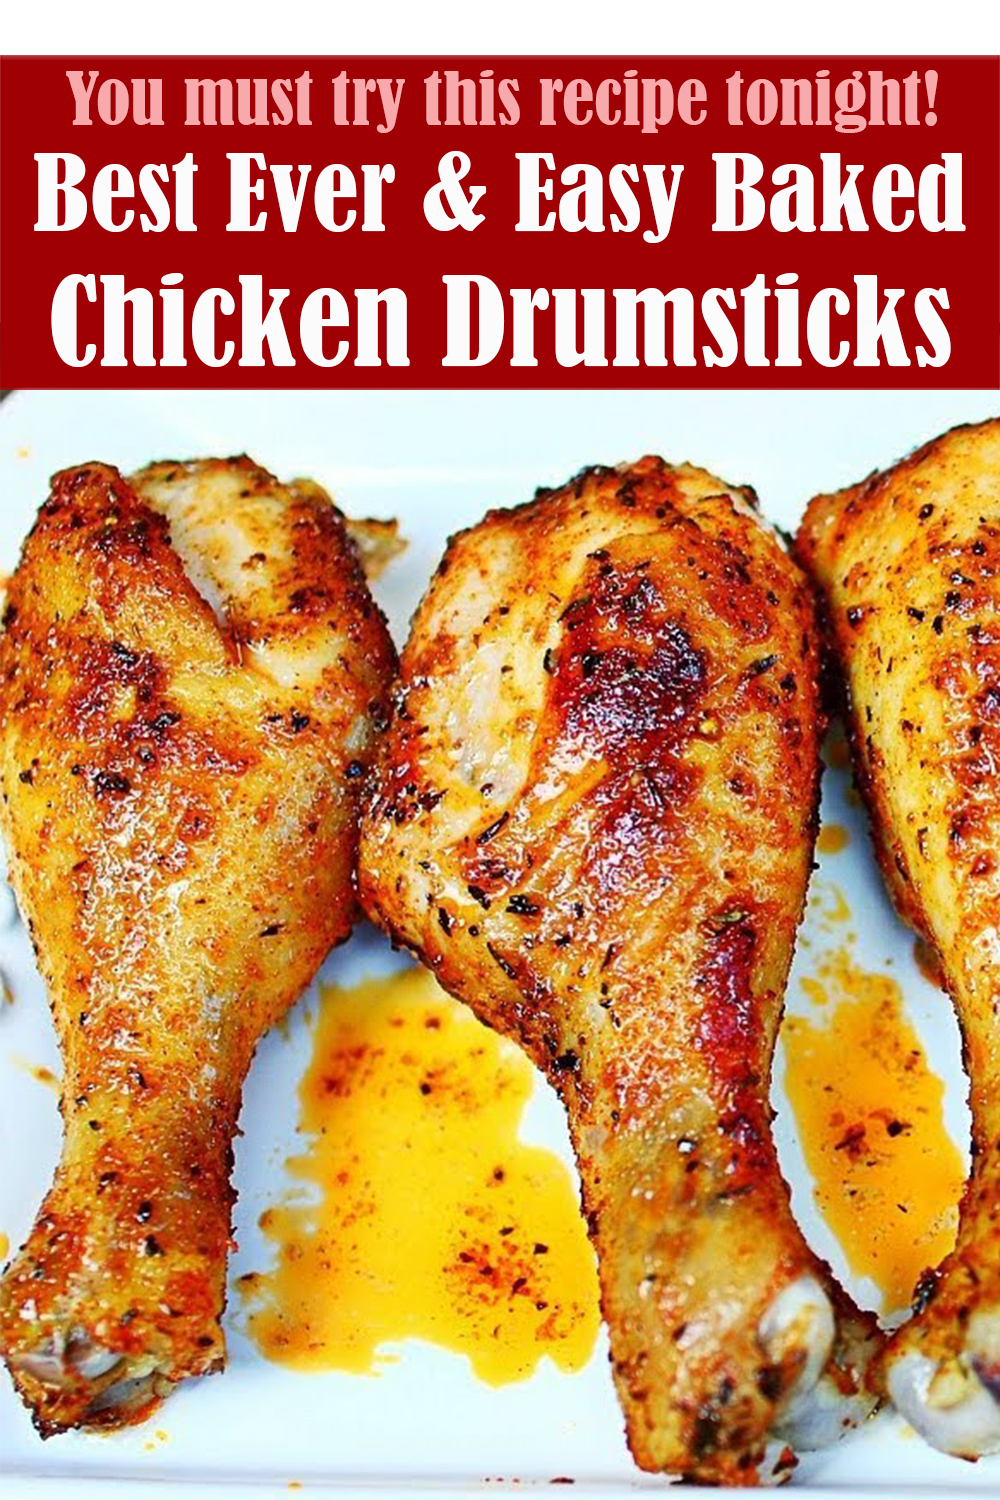 Best Ever and Easy Baked Chicken Drumsticks